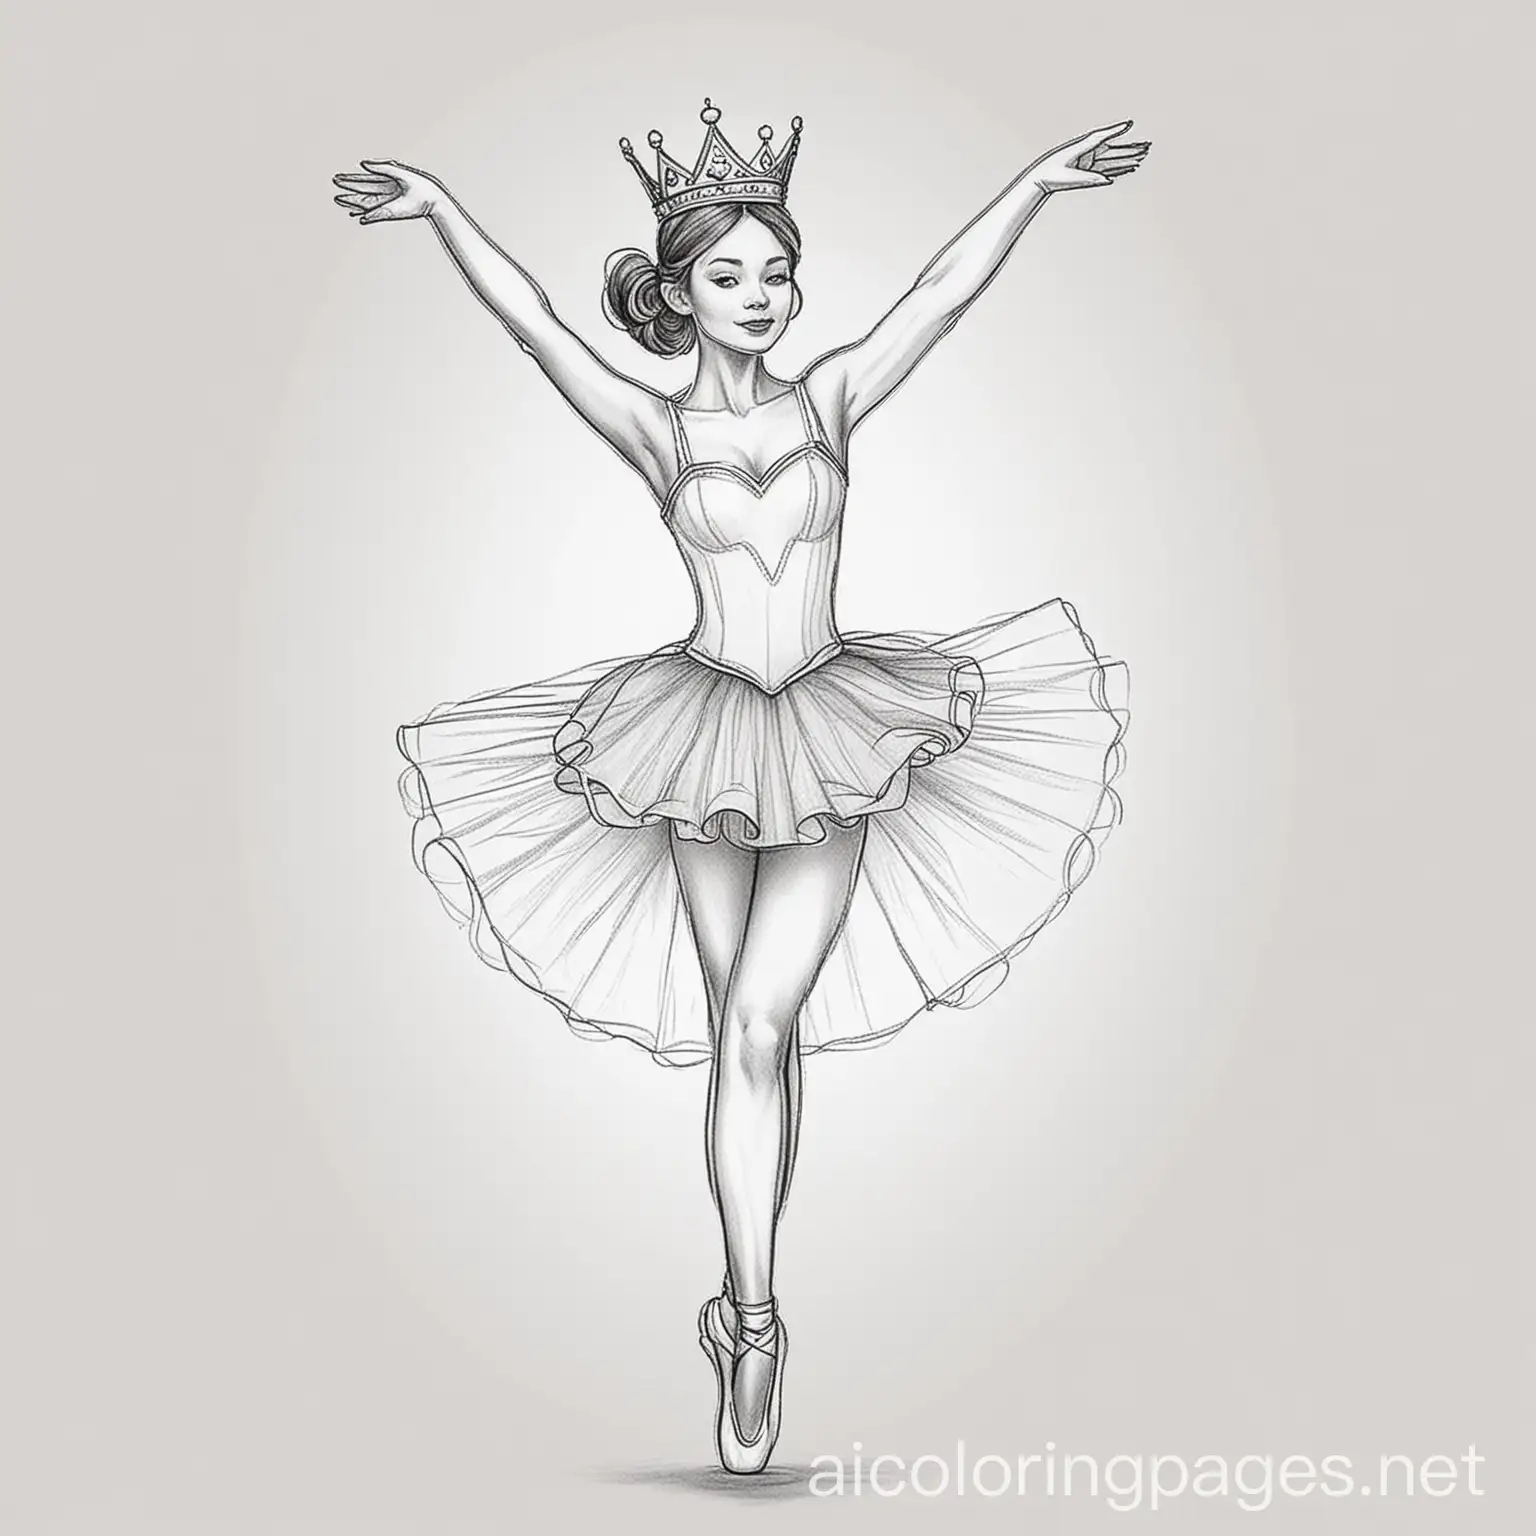 ballerina wearing a tutu and a crown with a heart on it doing a twirling jump with her feet crossed and her arms above her head, Coloring Page, black and white, line art, white background, Simplicity, Ample White Space. The background of the coloring page is plain white to make it easy for young children to color within the lines. The outlines of all the subjects are easy to distinguish, making it simple for kids to color without too much difficulty